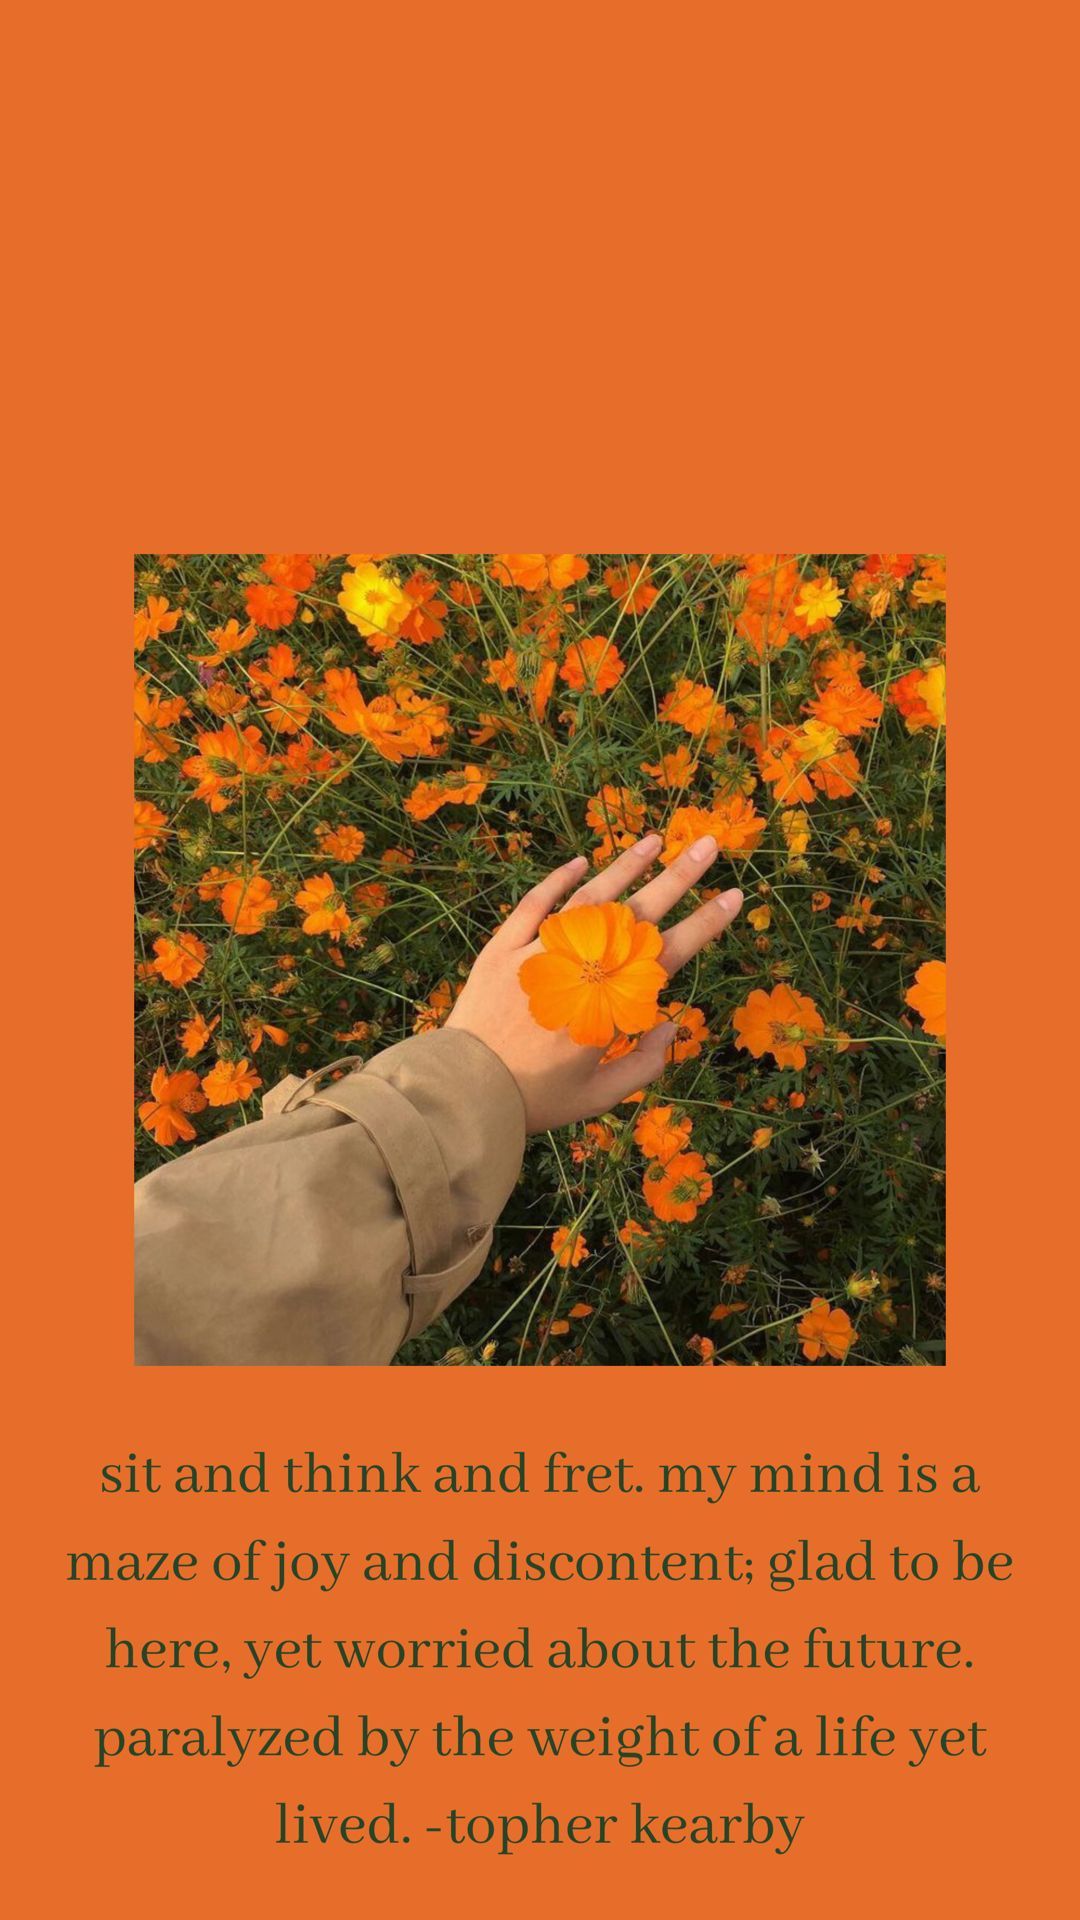 An orange image with a hand holding a flower. A quote from Topher Kirby is written underneath. - Pastel orange